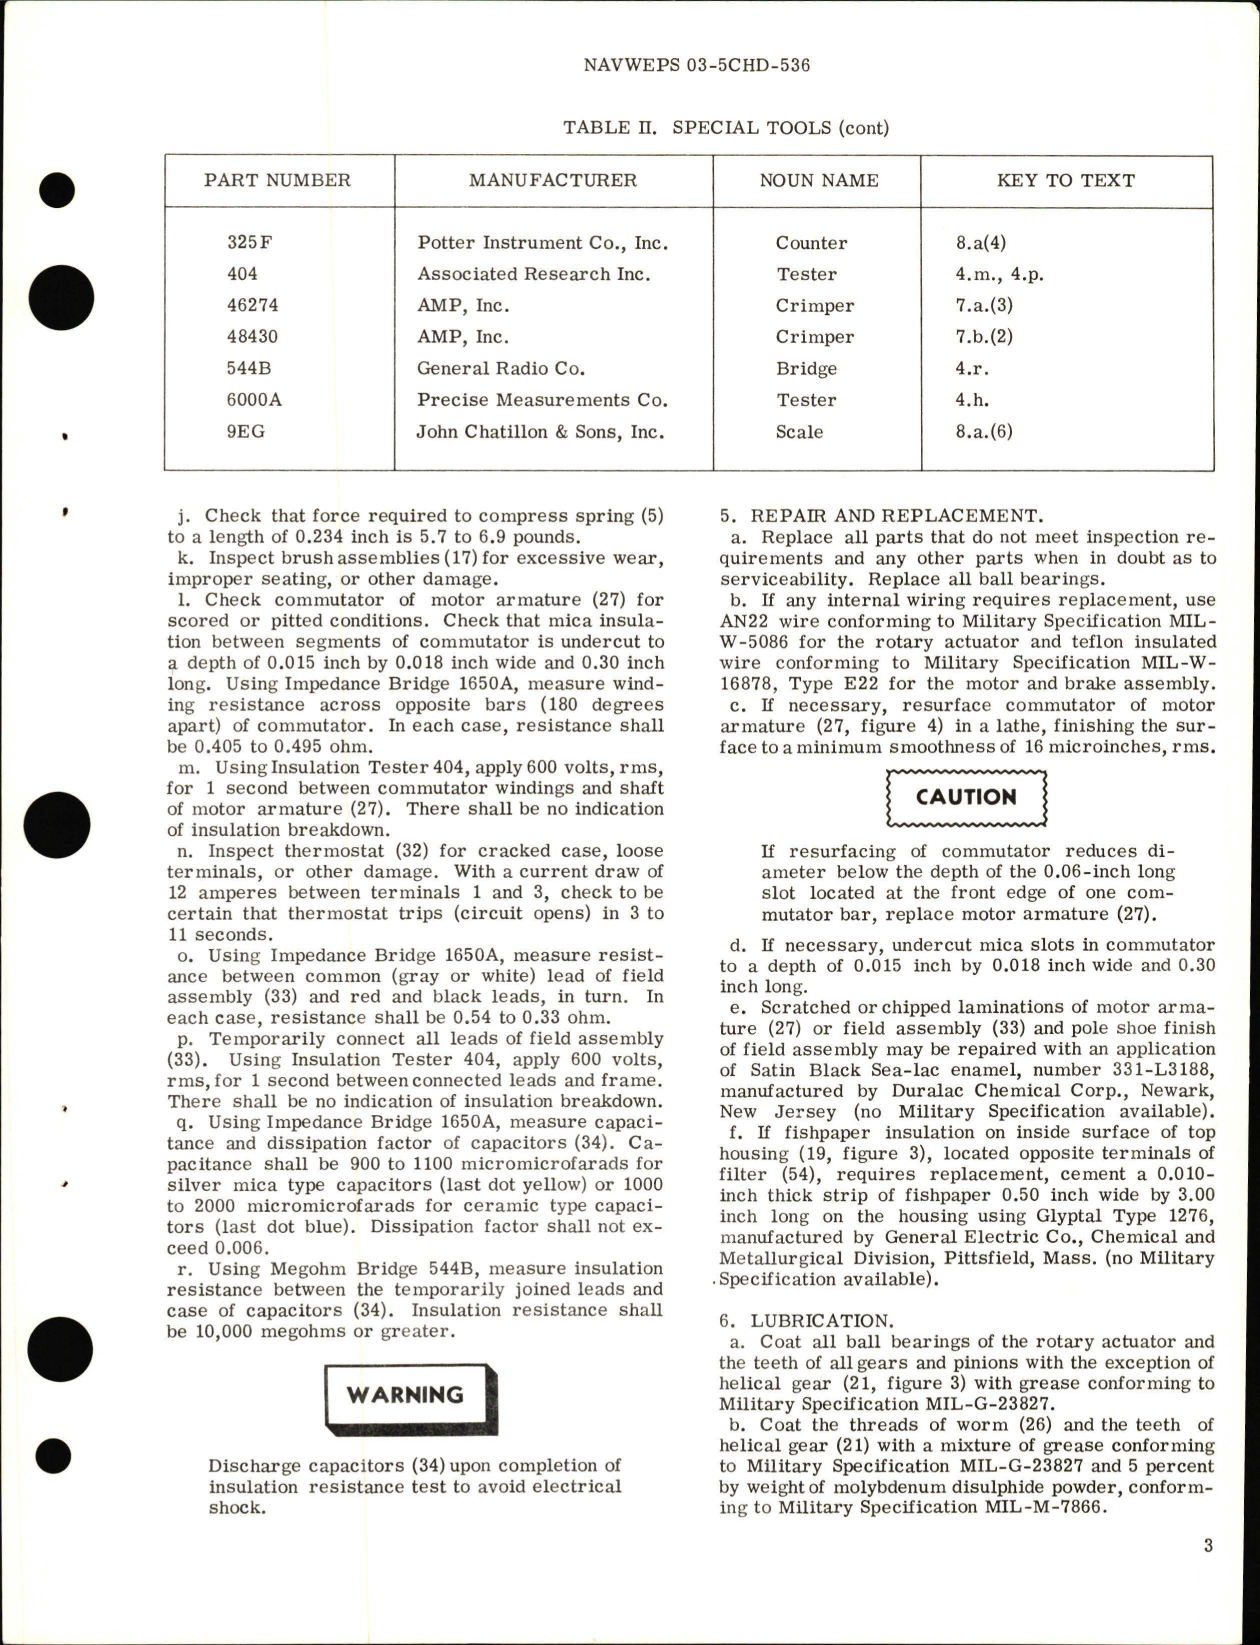 Sample page 5 from AirCorps Library document: Overhaul Instructions with Parts Breakdown for Rotary Electro-Mechanical Actuator, Part No R450M7